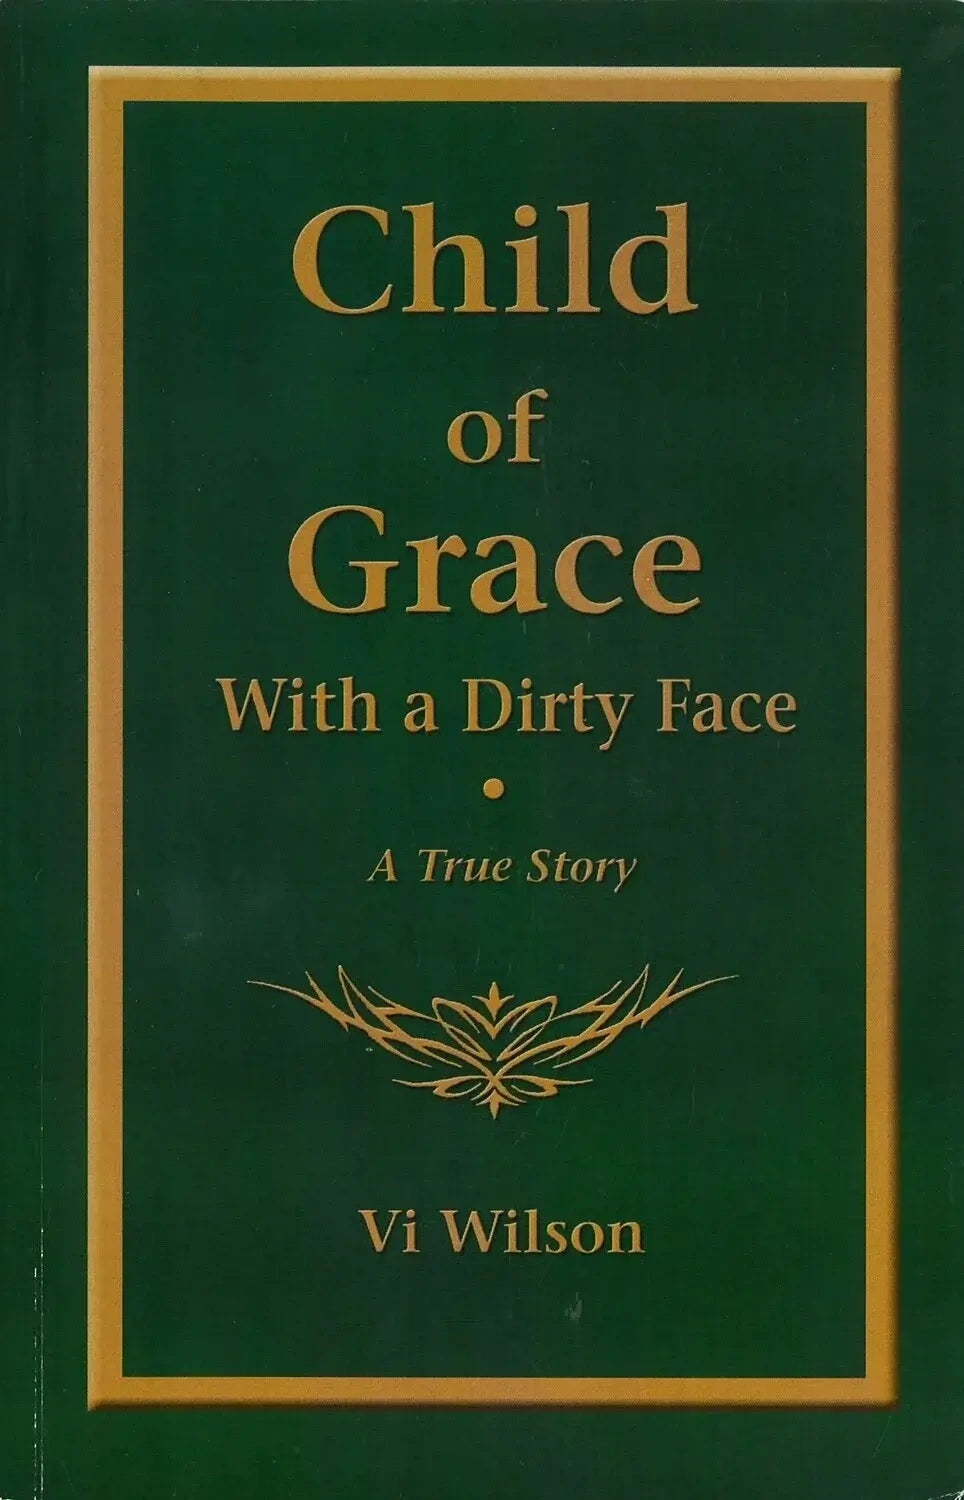 Child of Grace (With a Dirty Face) by Vi Wilson